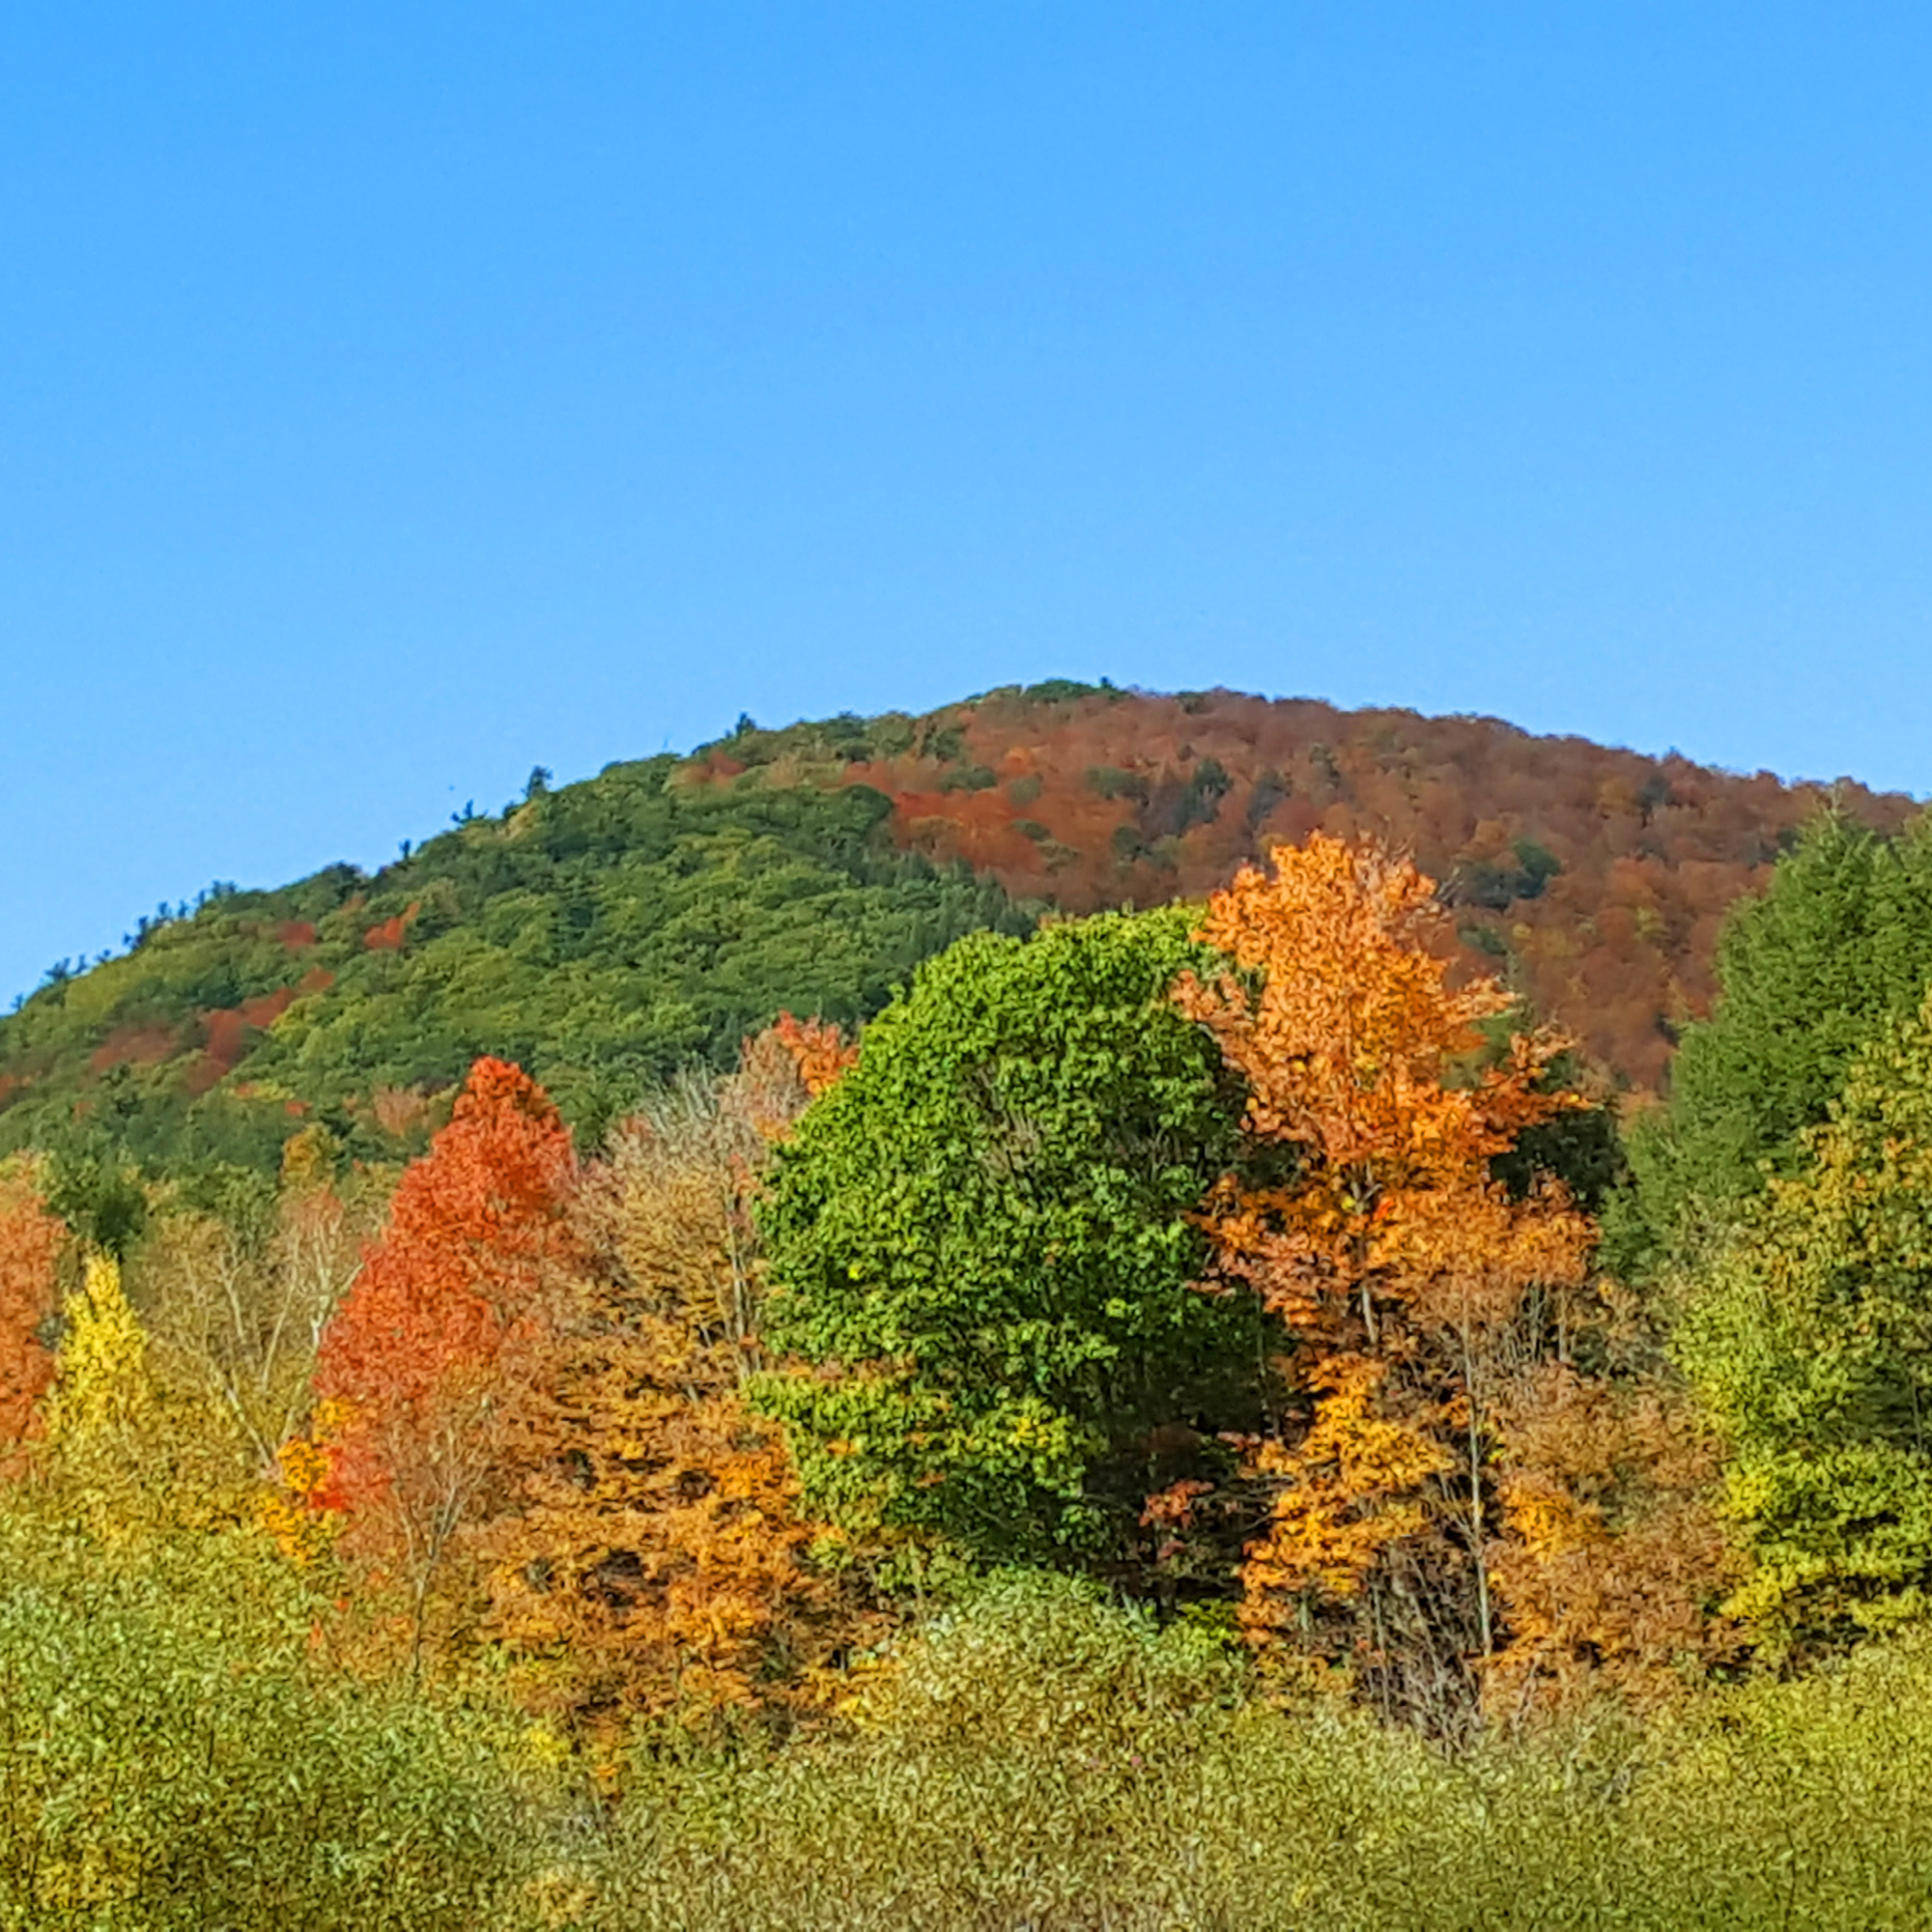 hill in fall colors with more trees in foreground